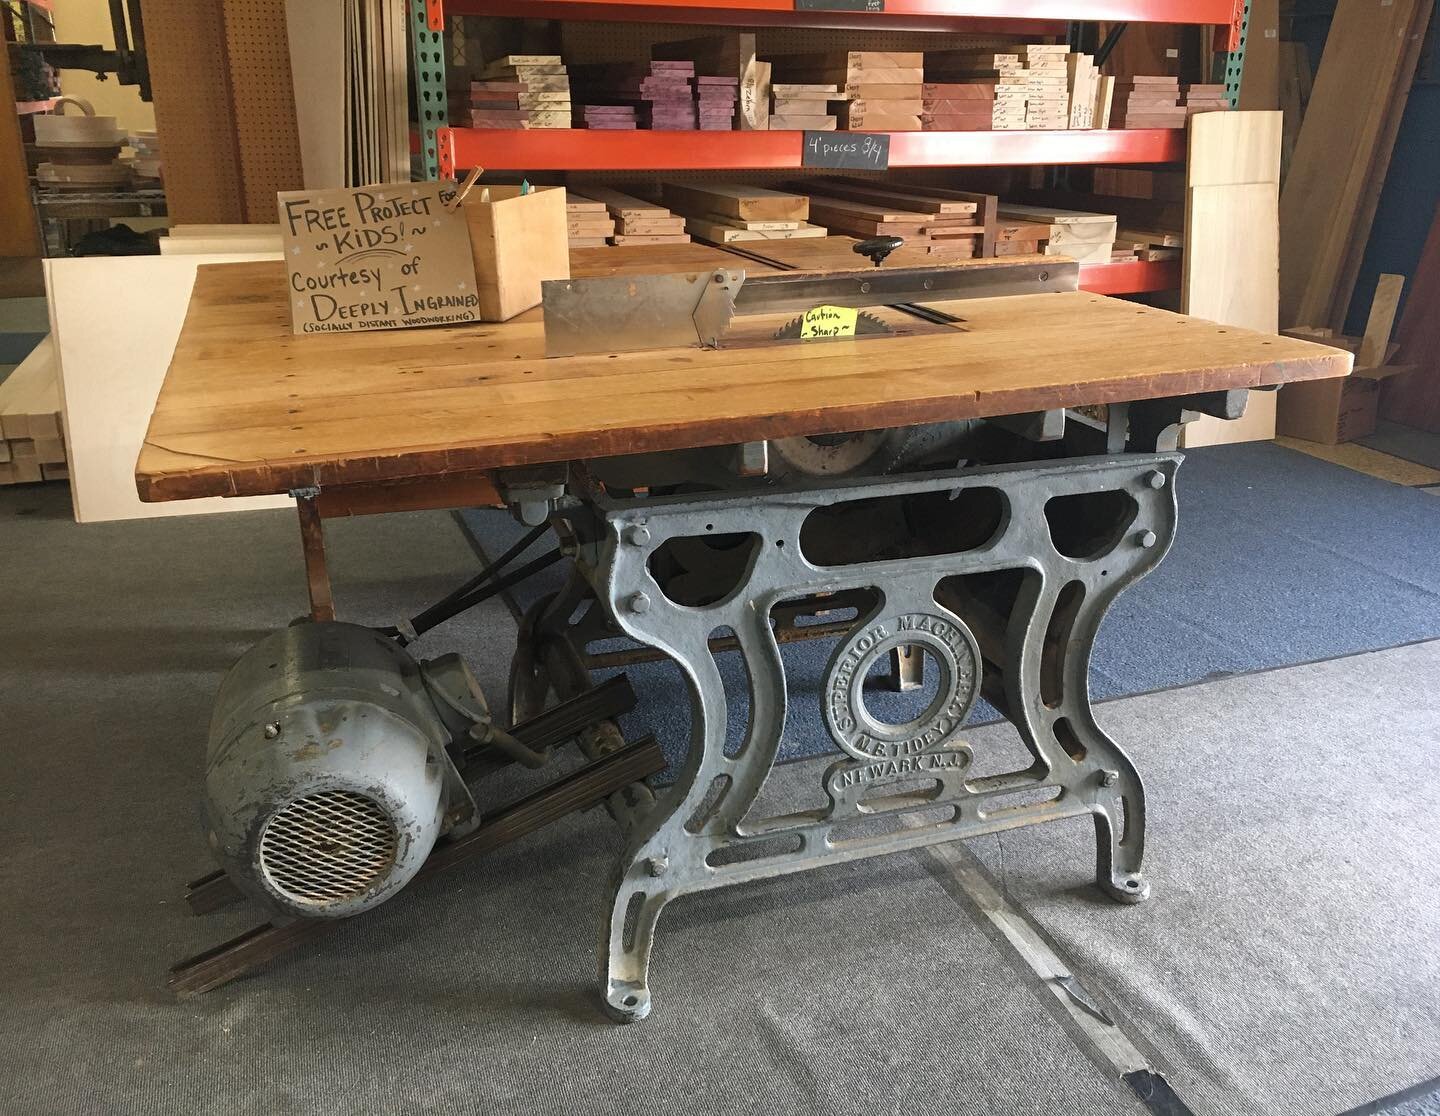 🪚Come see historical pieces at the wood museum (aka. our showroom - ha)!🪚
🪚This is our 1888 Marcus B. Tidey tablesaw, which used to be steam-powered. It was converted to electric &amp; we used it in our shop until about 2019. It is still in workin